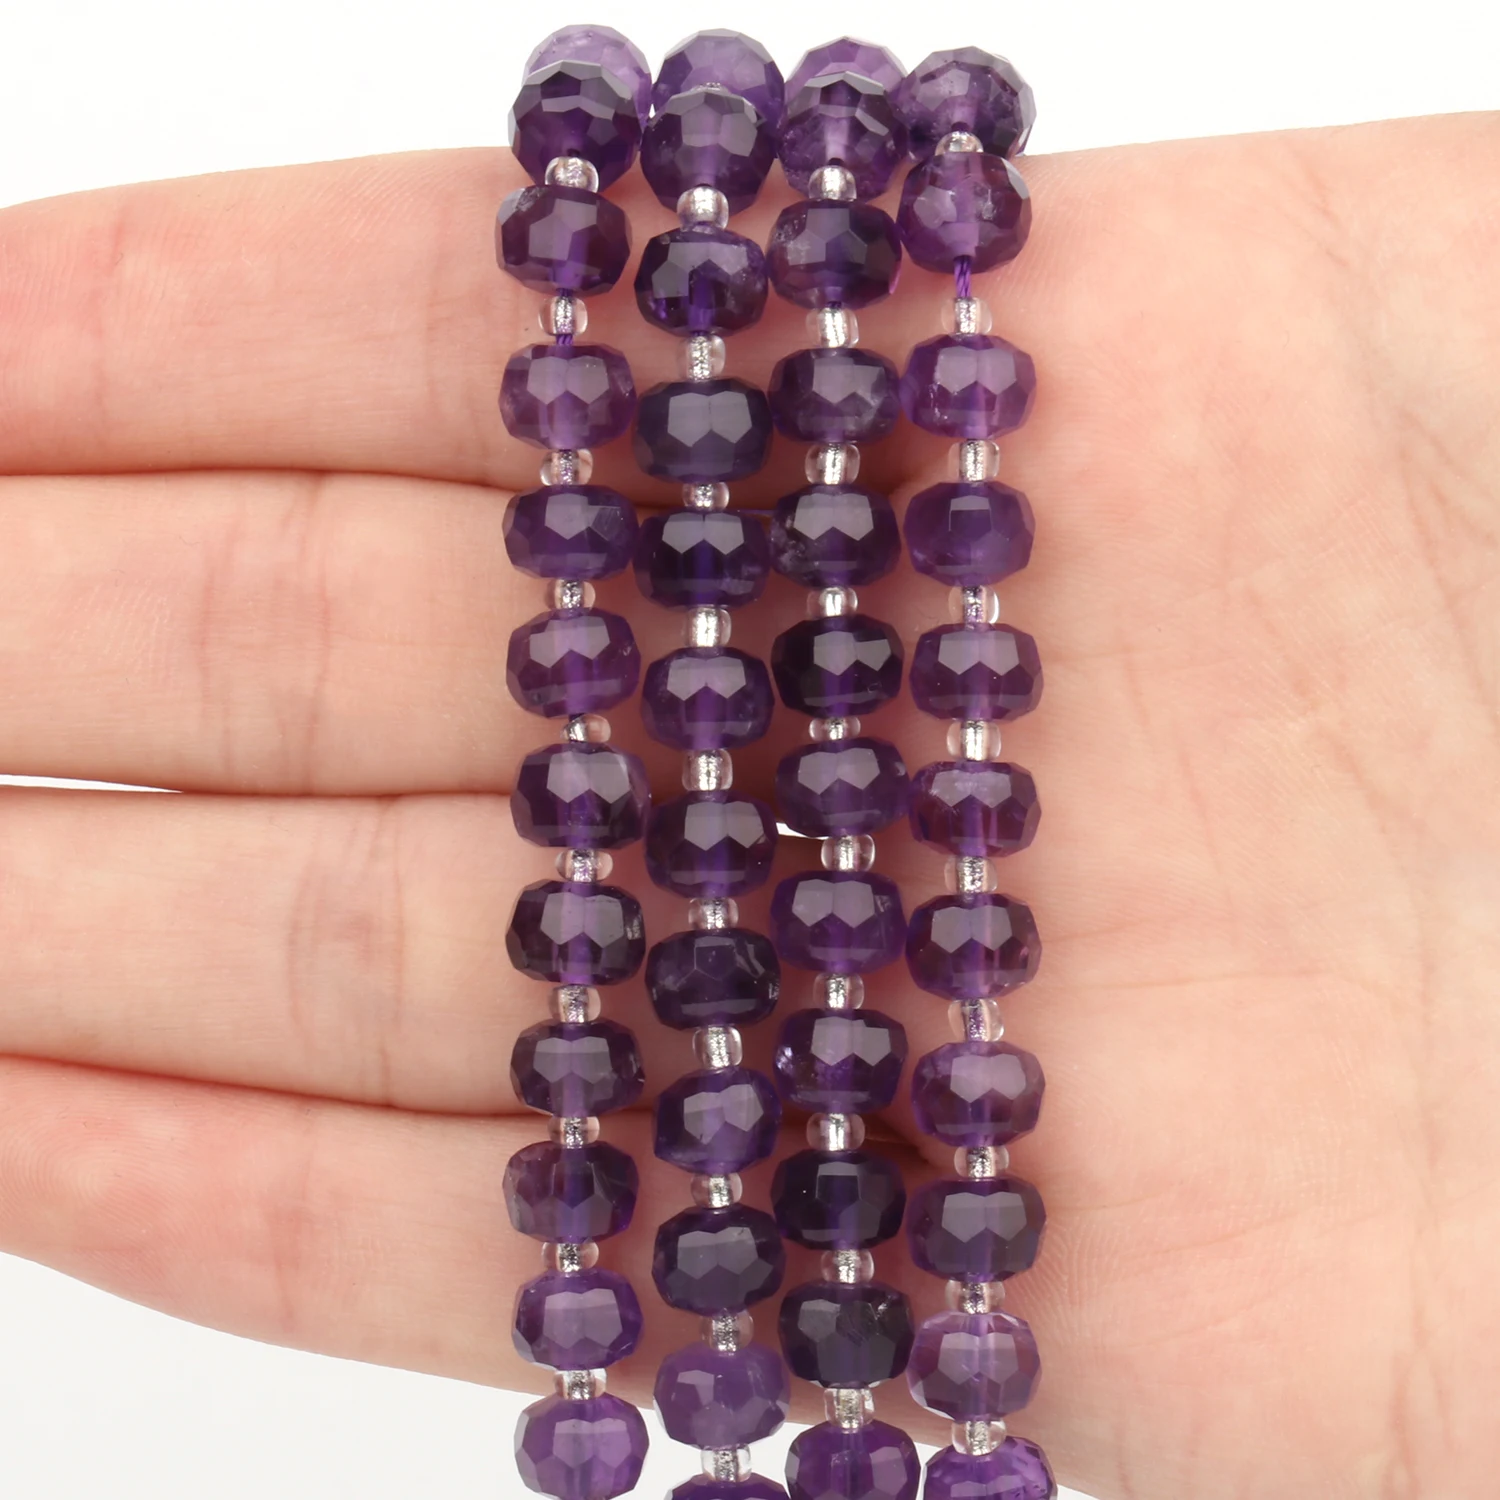 

Faceted AAA Natural Amethyst Stone Beads Charms Wheel Shape Beads For DIY Jewelry Making Handmade Bracelet 8x6mm Wholesale